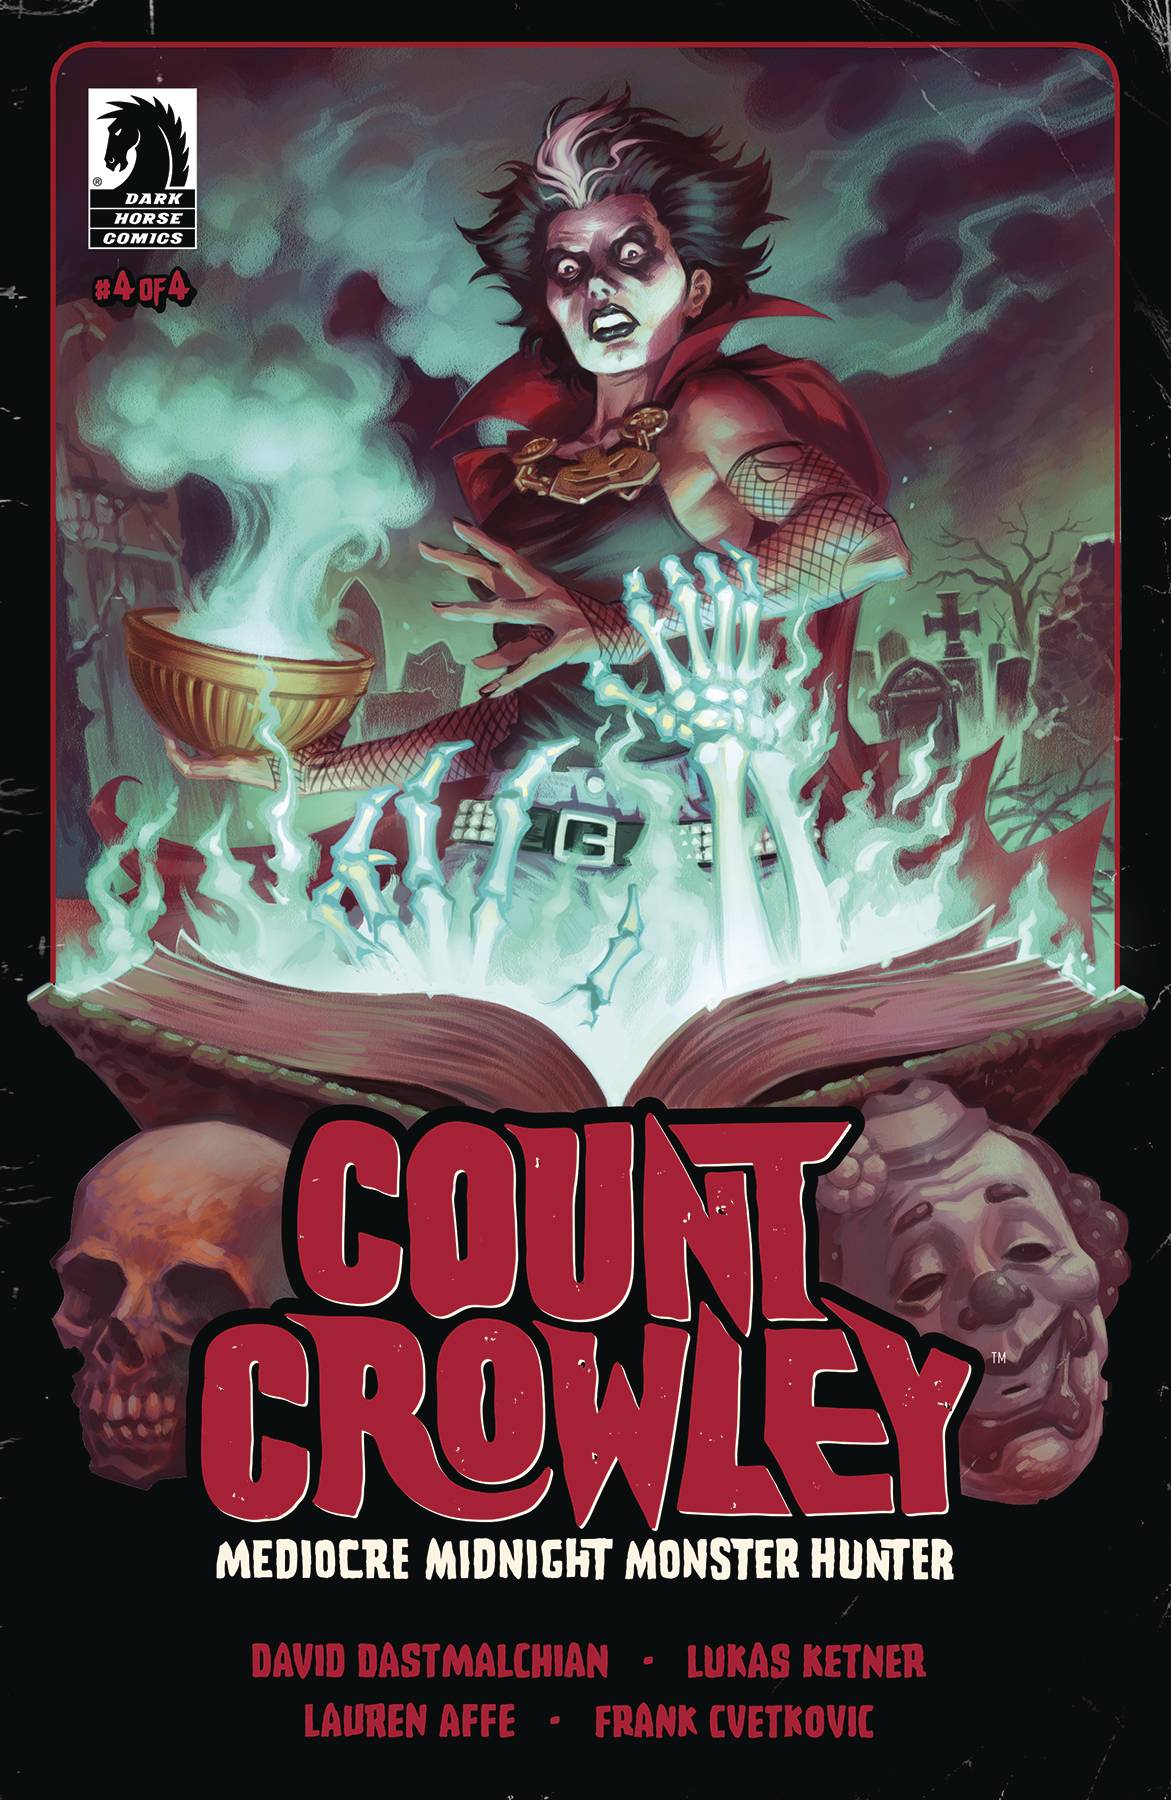 Count Crowley: Mediocre Midnight Monster Hunter #4 (Cover A) (Lukas Ketner)